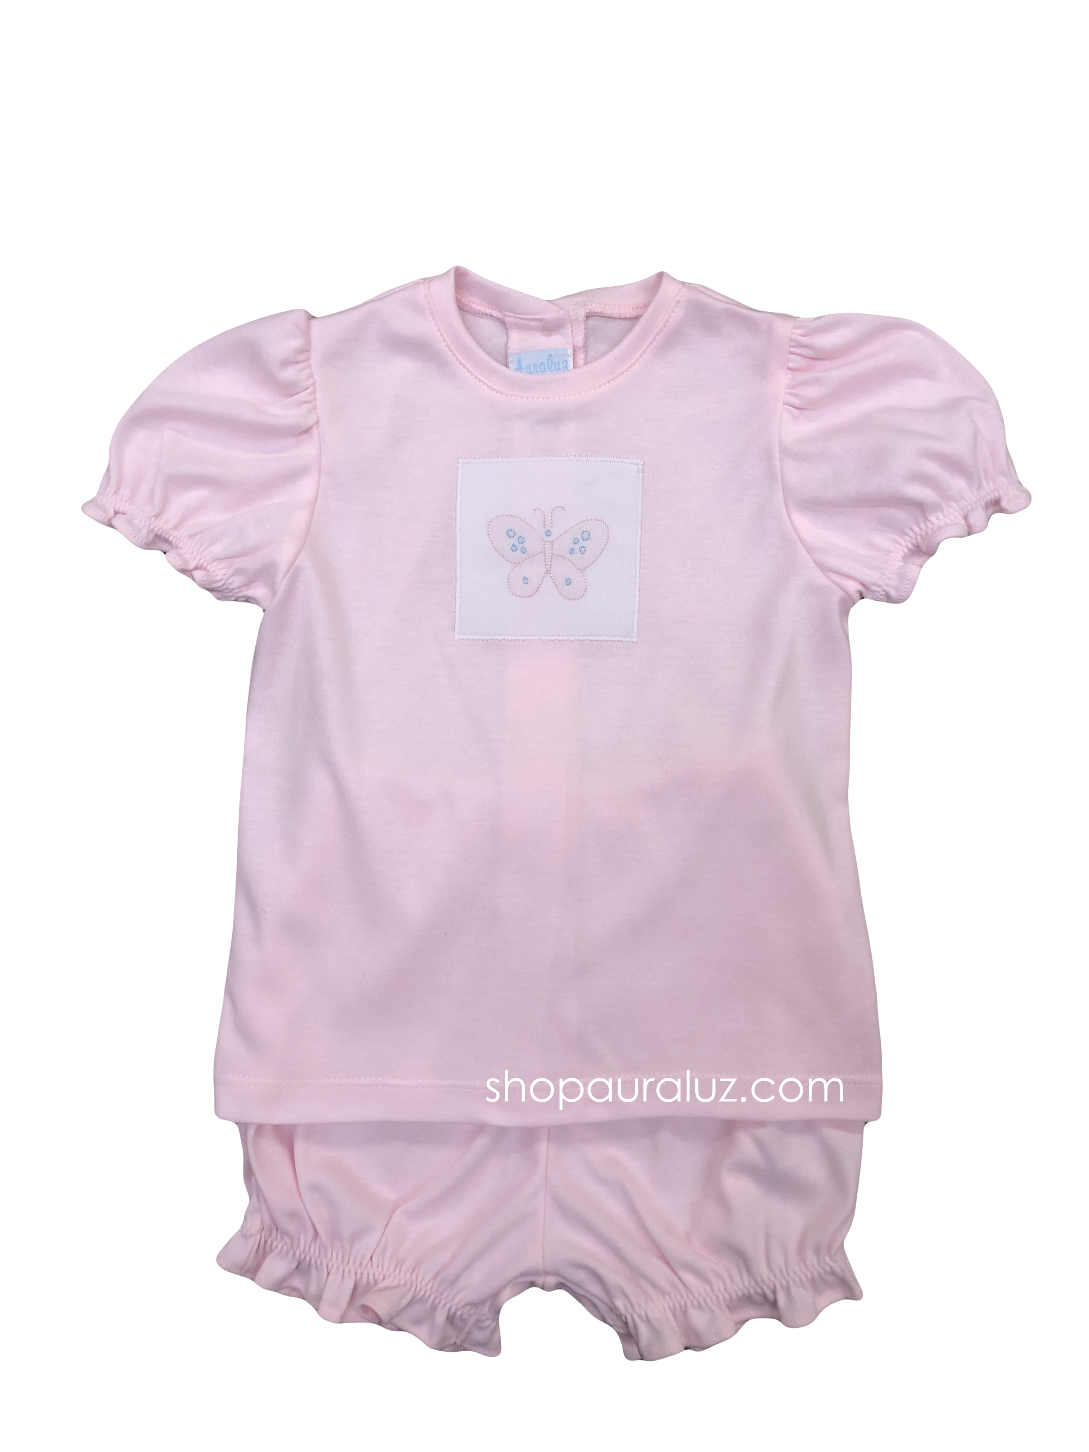 Auraluz Knit Girl 2pc...Pink with no collar and embroidered butterfly